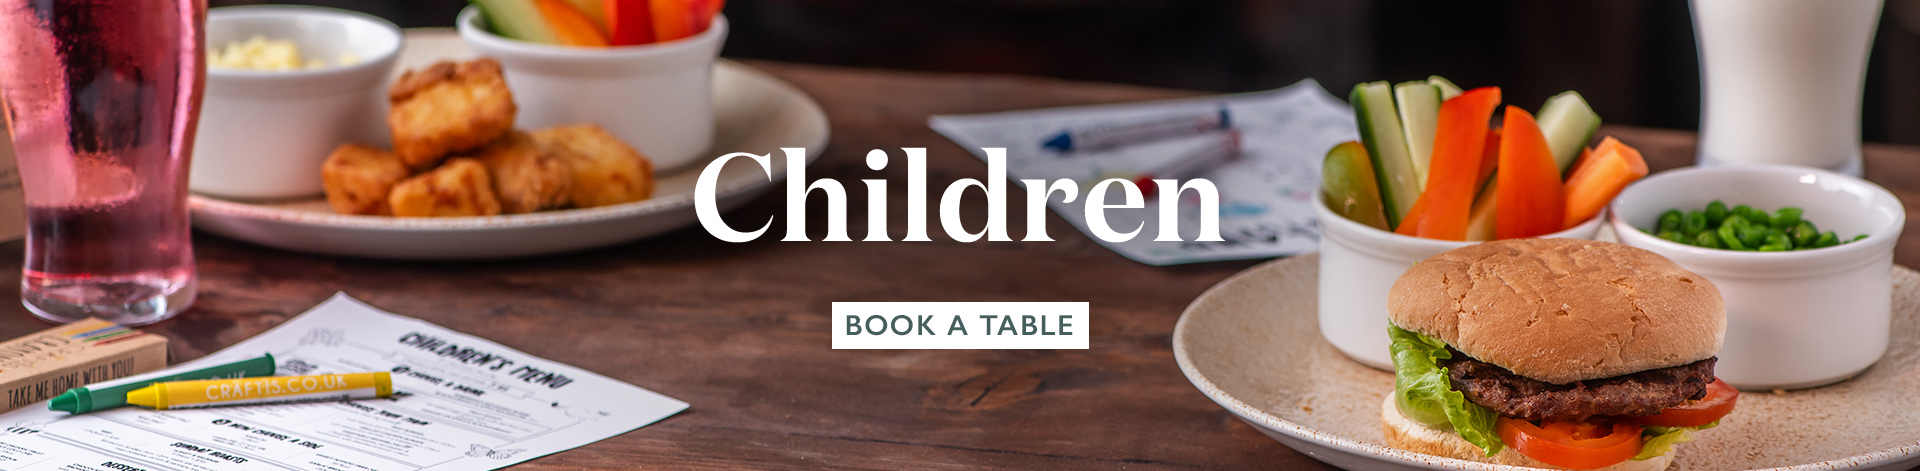 Children's Menu at The March Hare